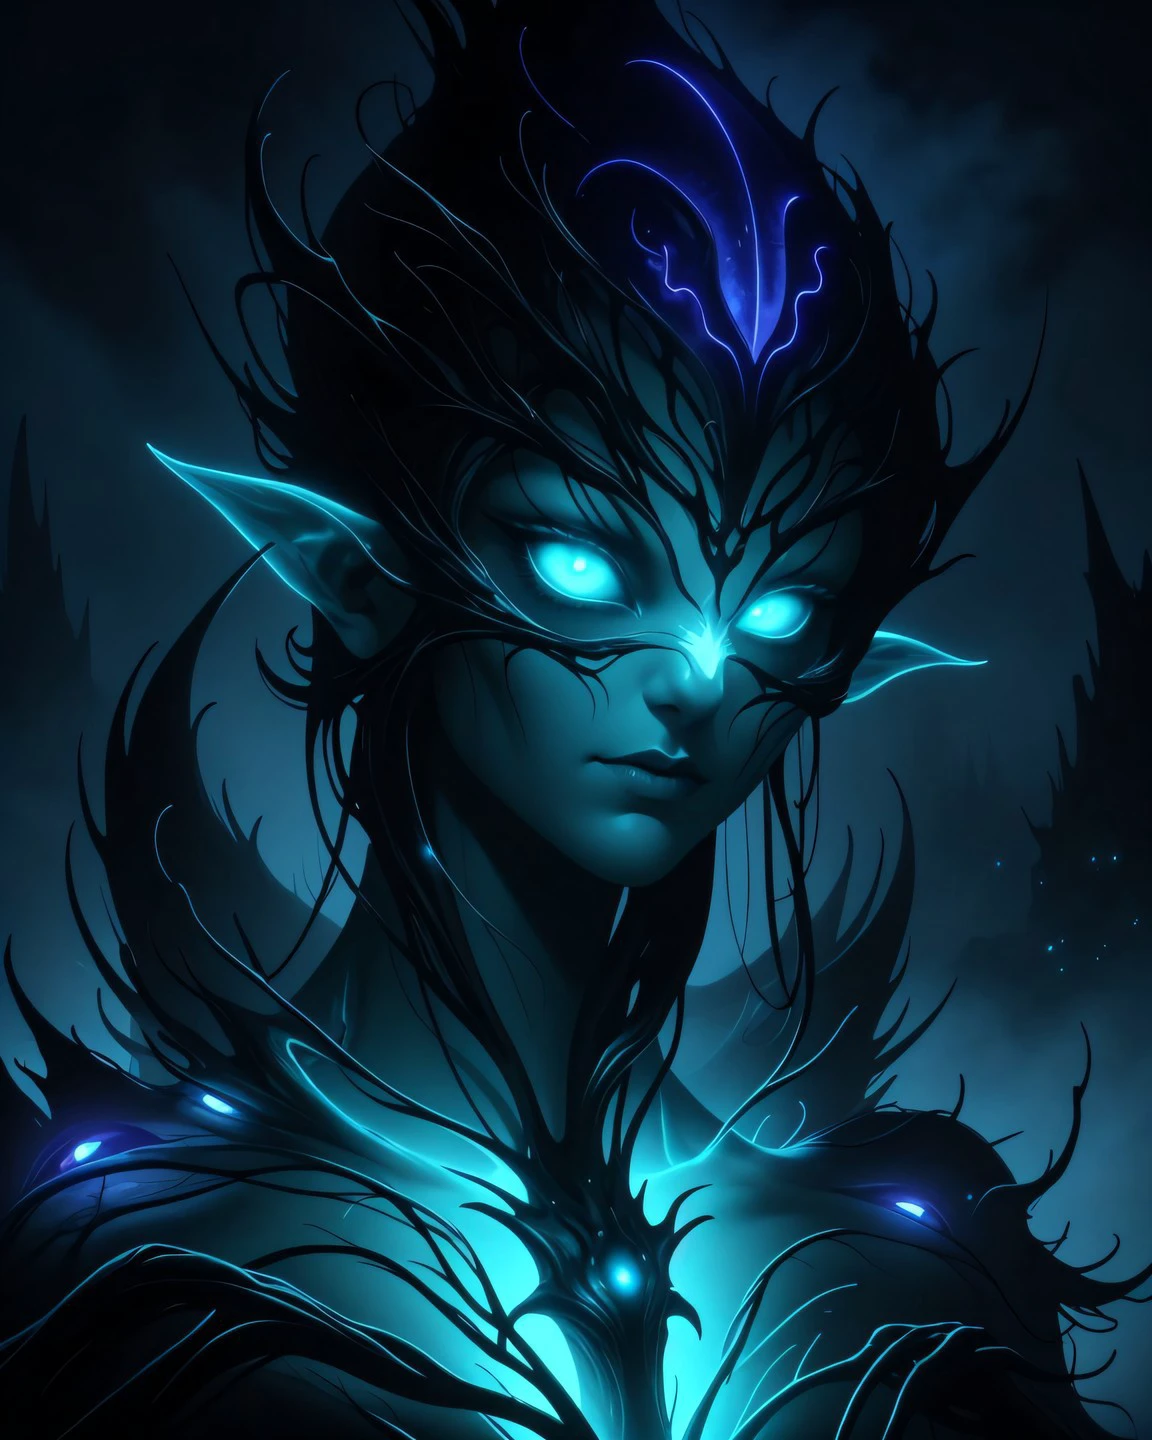 Medium Close-Up of a warlock corrupted by the fey, night, otherworldly presence with cold lighting, glowing veins, bioluminescence, donmx3n0